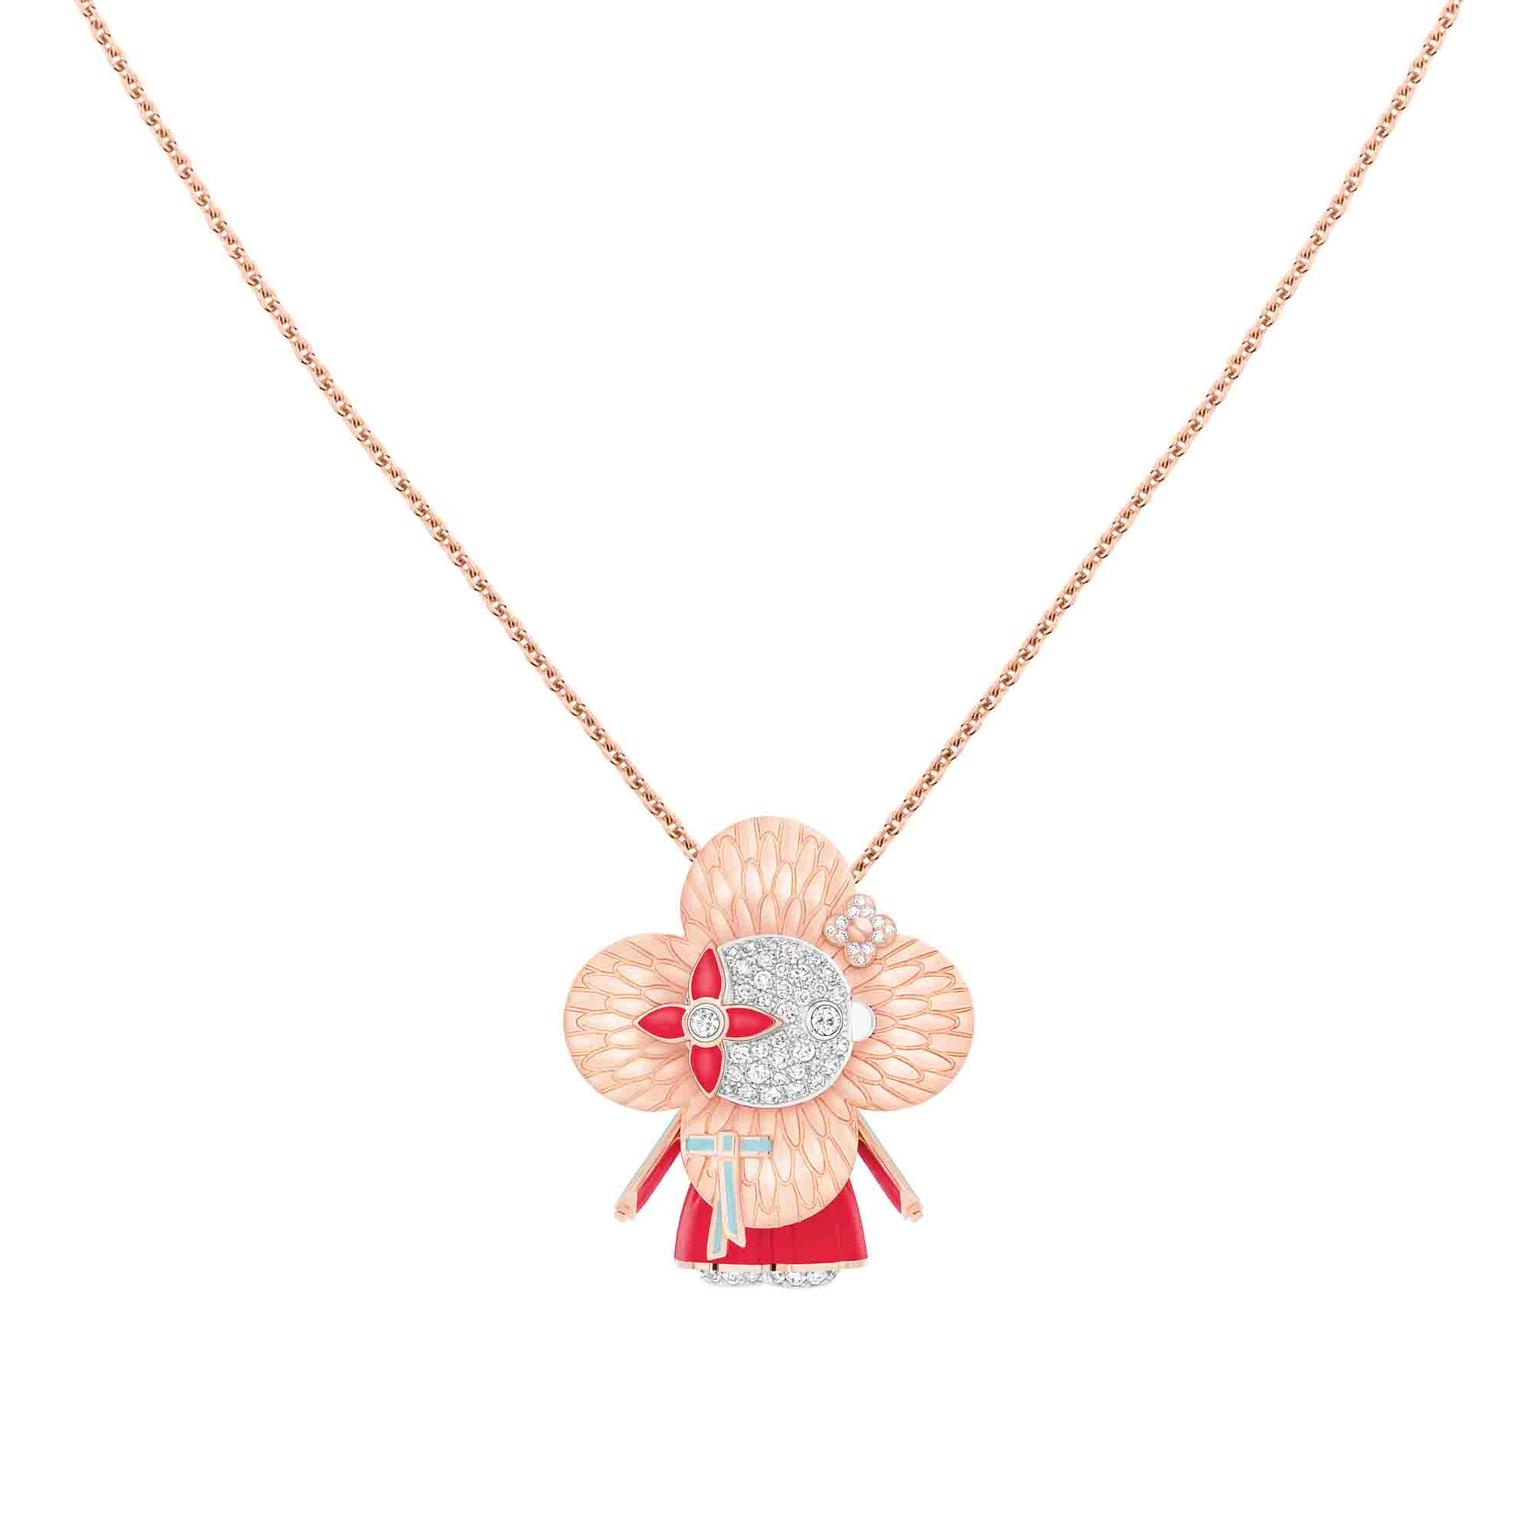 Louis Vuitton's mascot Vivienne expands into 11 new jewellery creations -  The Glass Magazine